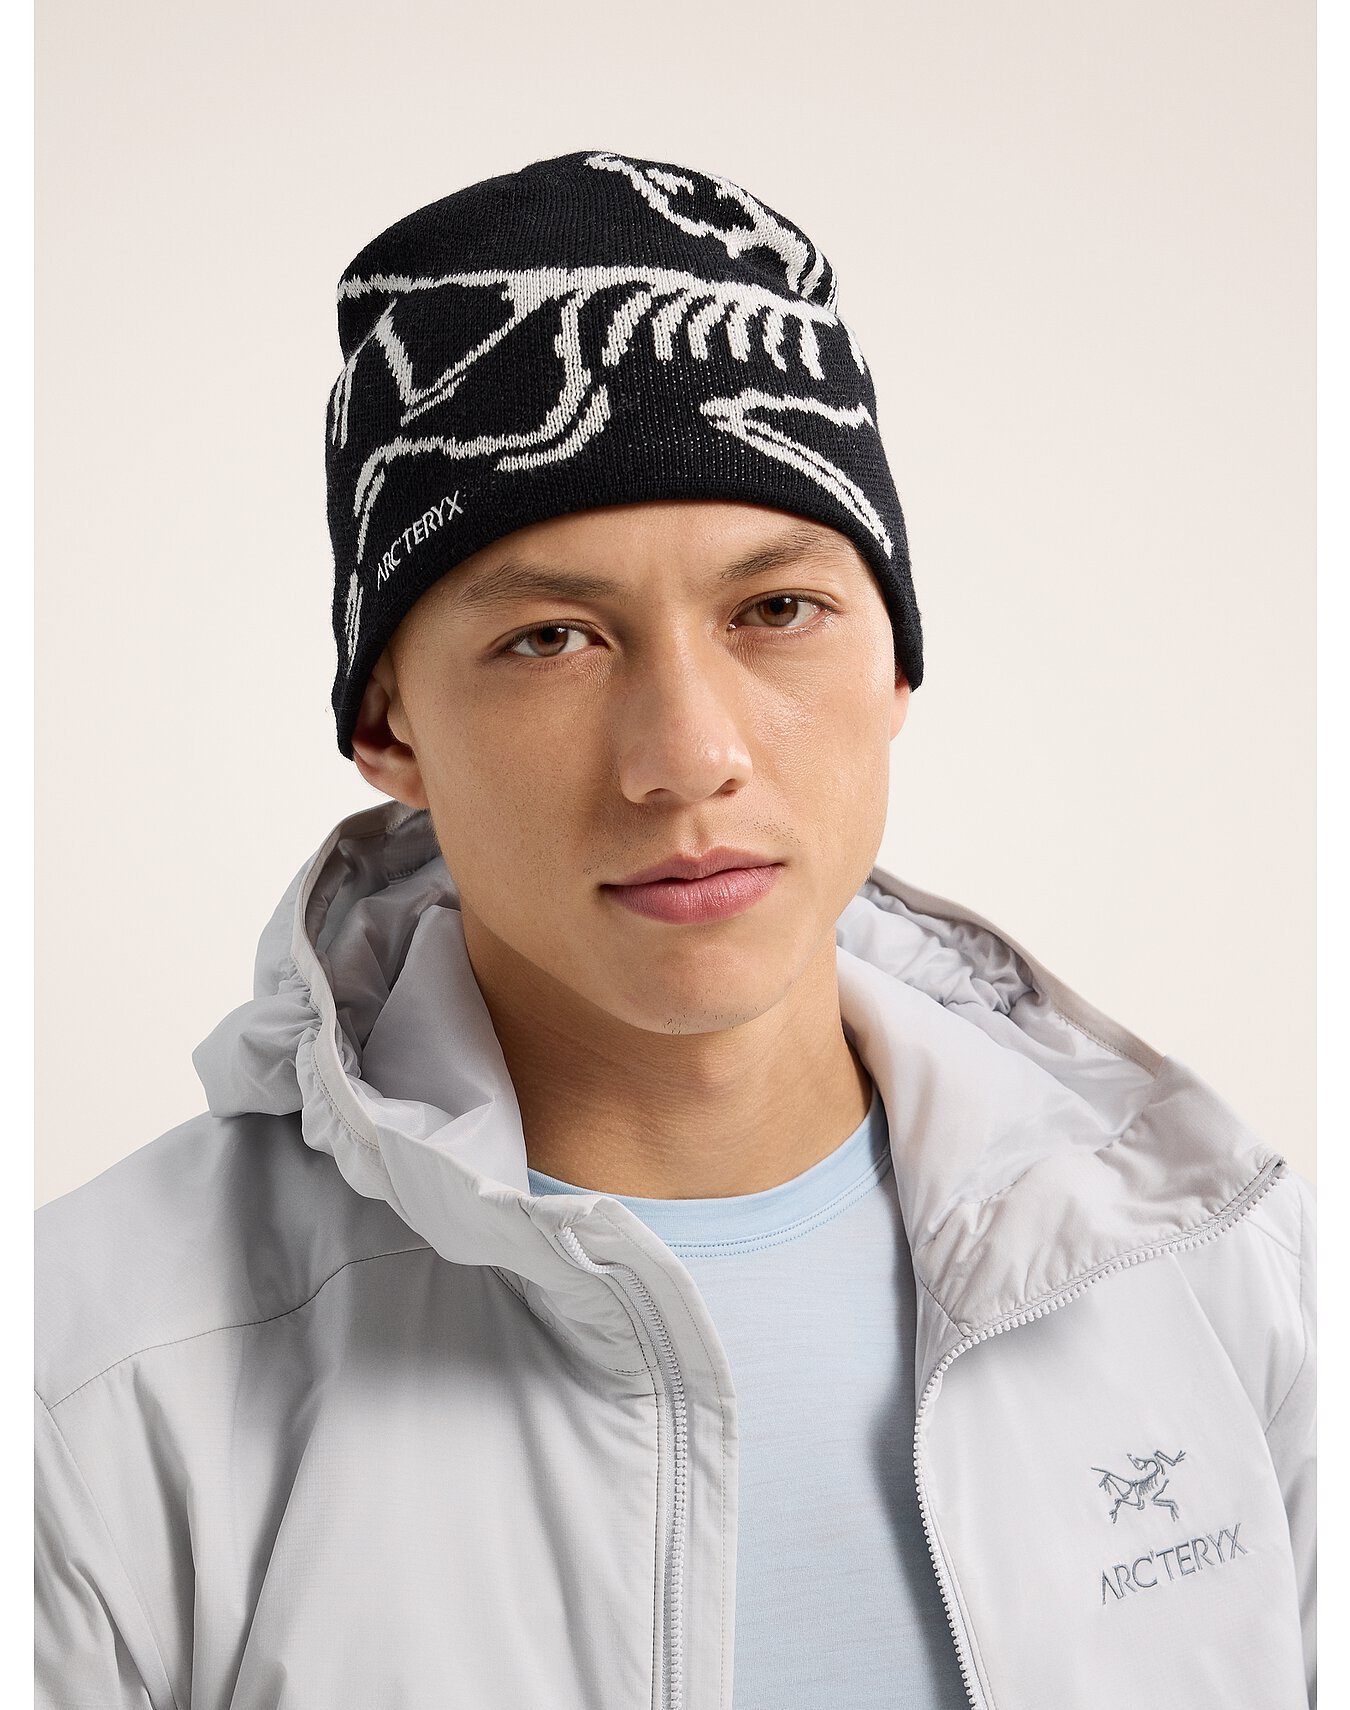 https://images-dynamic-arcteryx.imgix.net/details/1350x1710/S24-X000006756-Bird-Head-Toque-Orca-Front-View.jpg